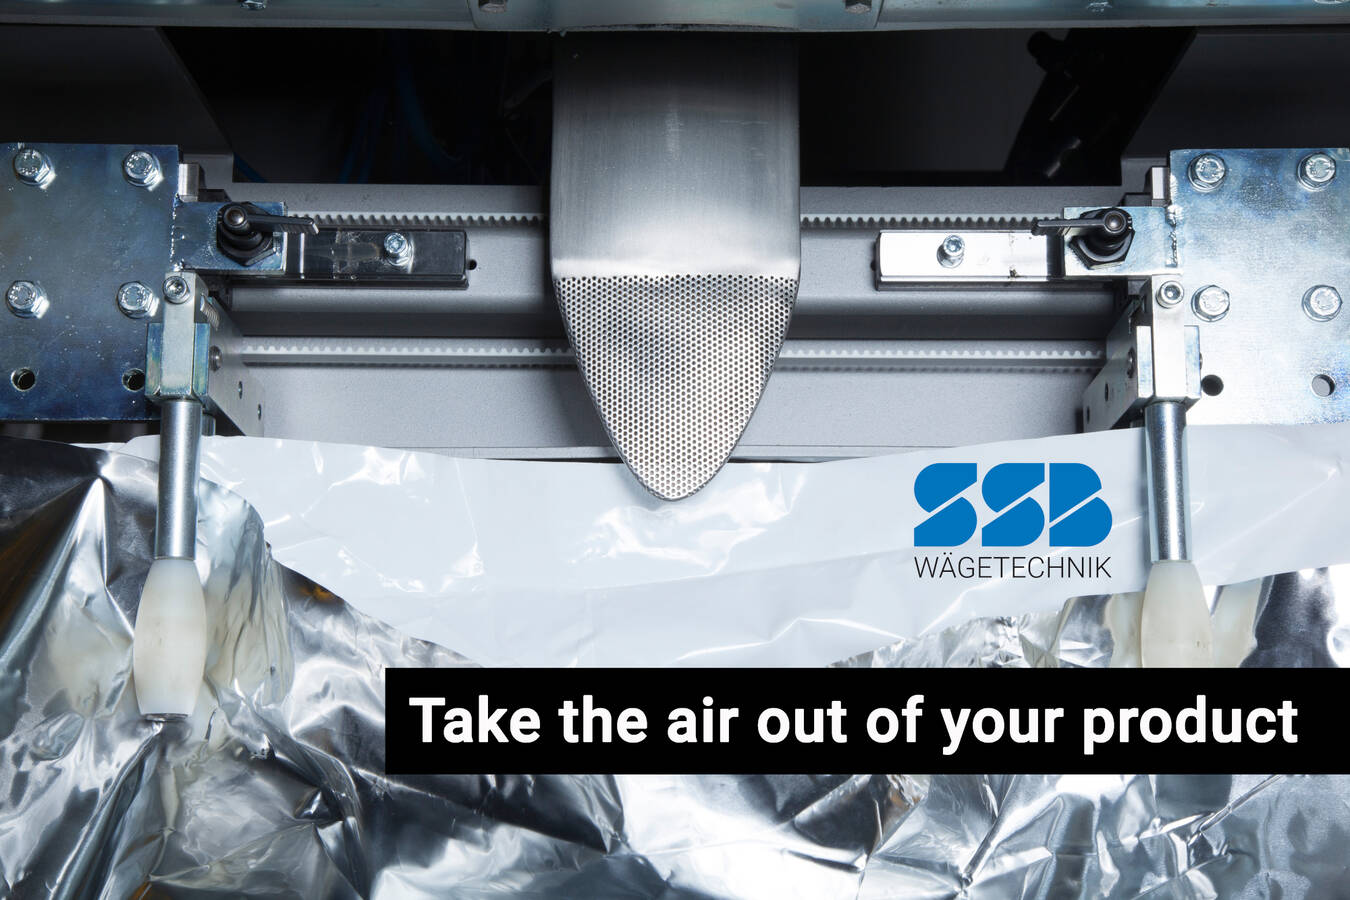 Professional and clean solution for sealing large containers Sealing station STV 2200 from SSB Wägetechnik GmbH. During closing of the bags a vacuum is generated, which is the safest and most effective way to evacuate residual air.